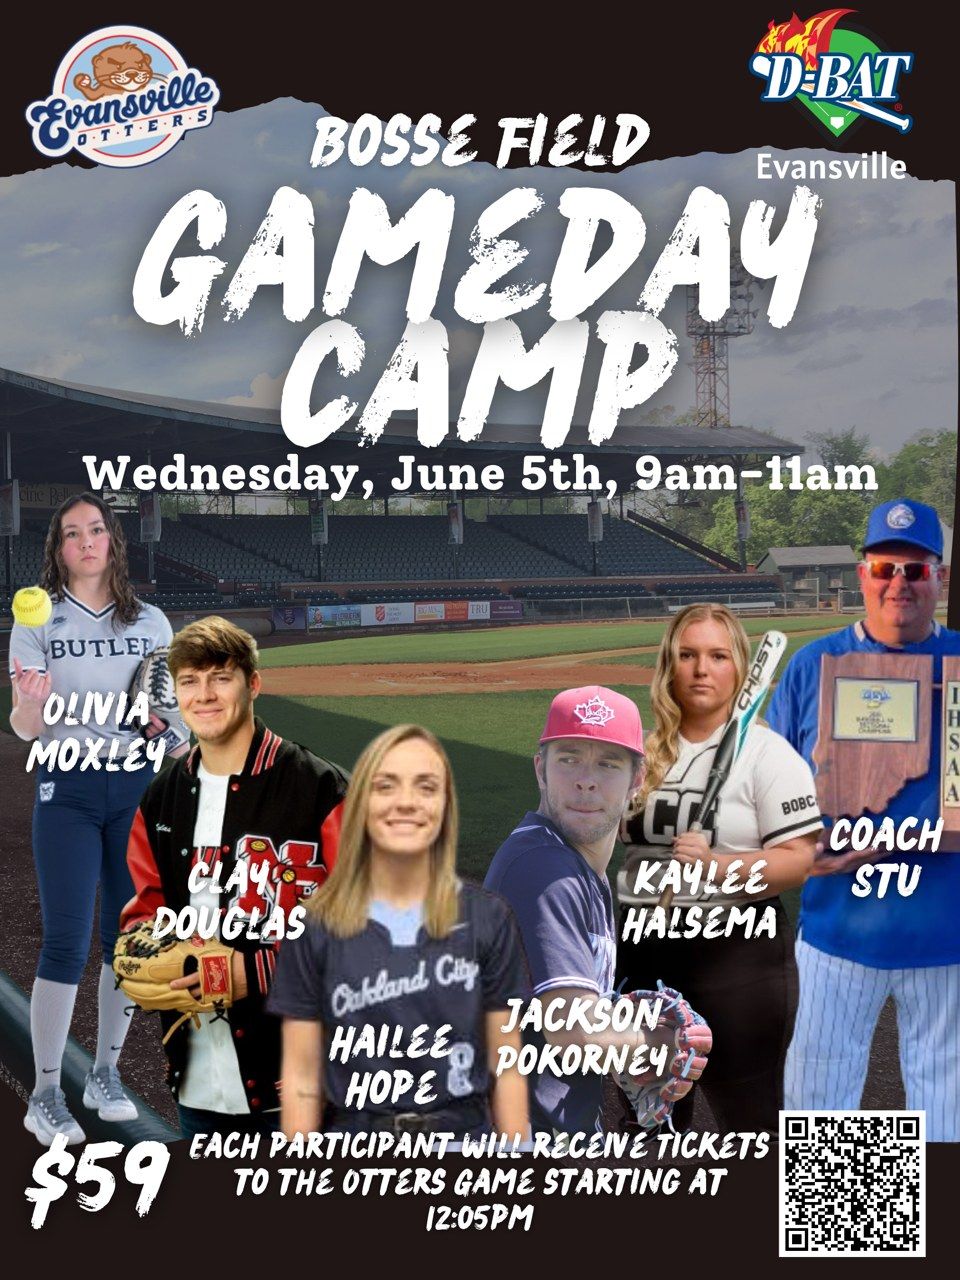 D-BAT GAMEDAY CAMP @ HISTORIC BOSSE FIELD WITH THE OTTERS!